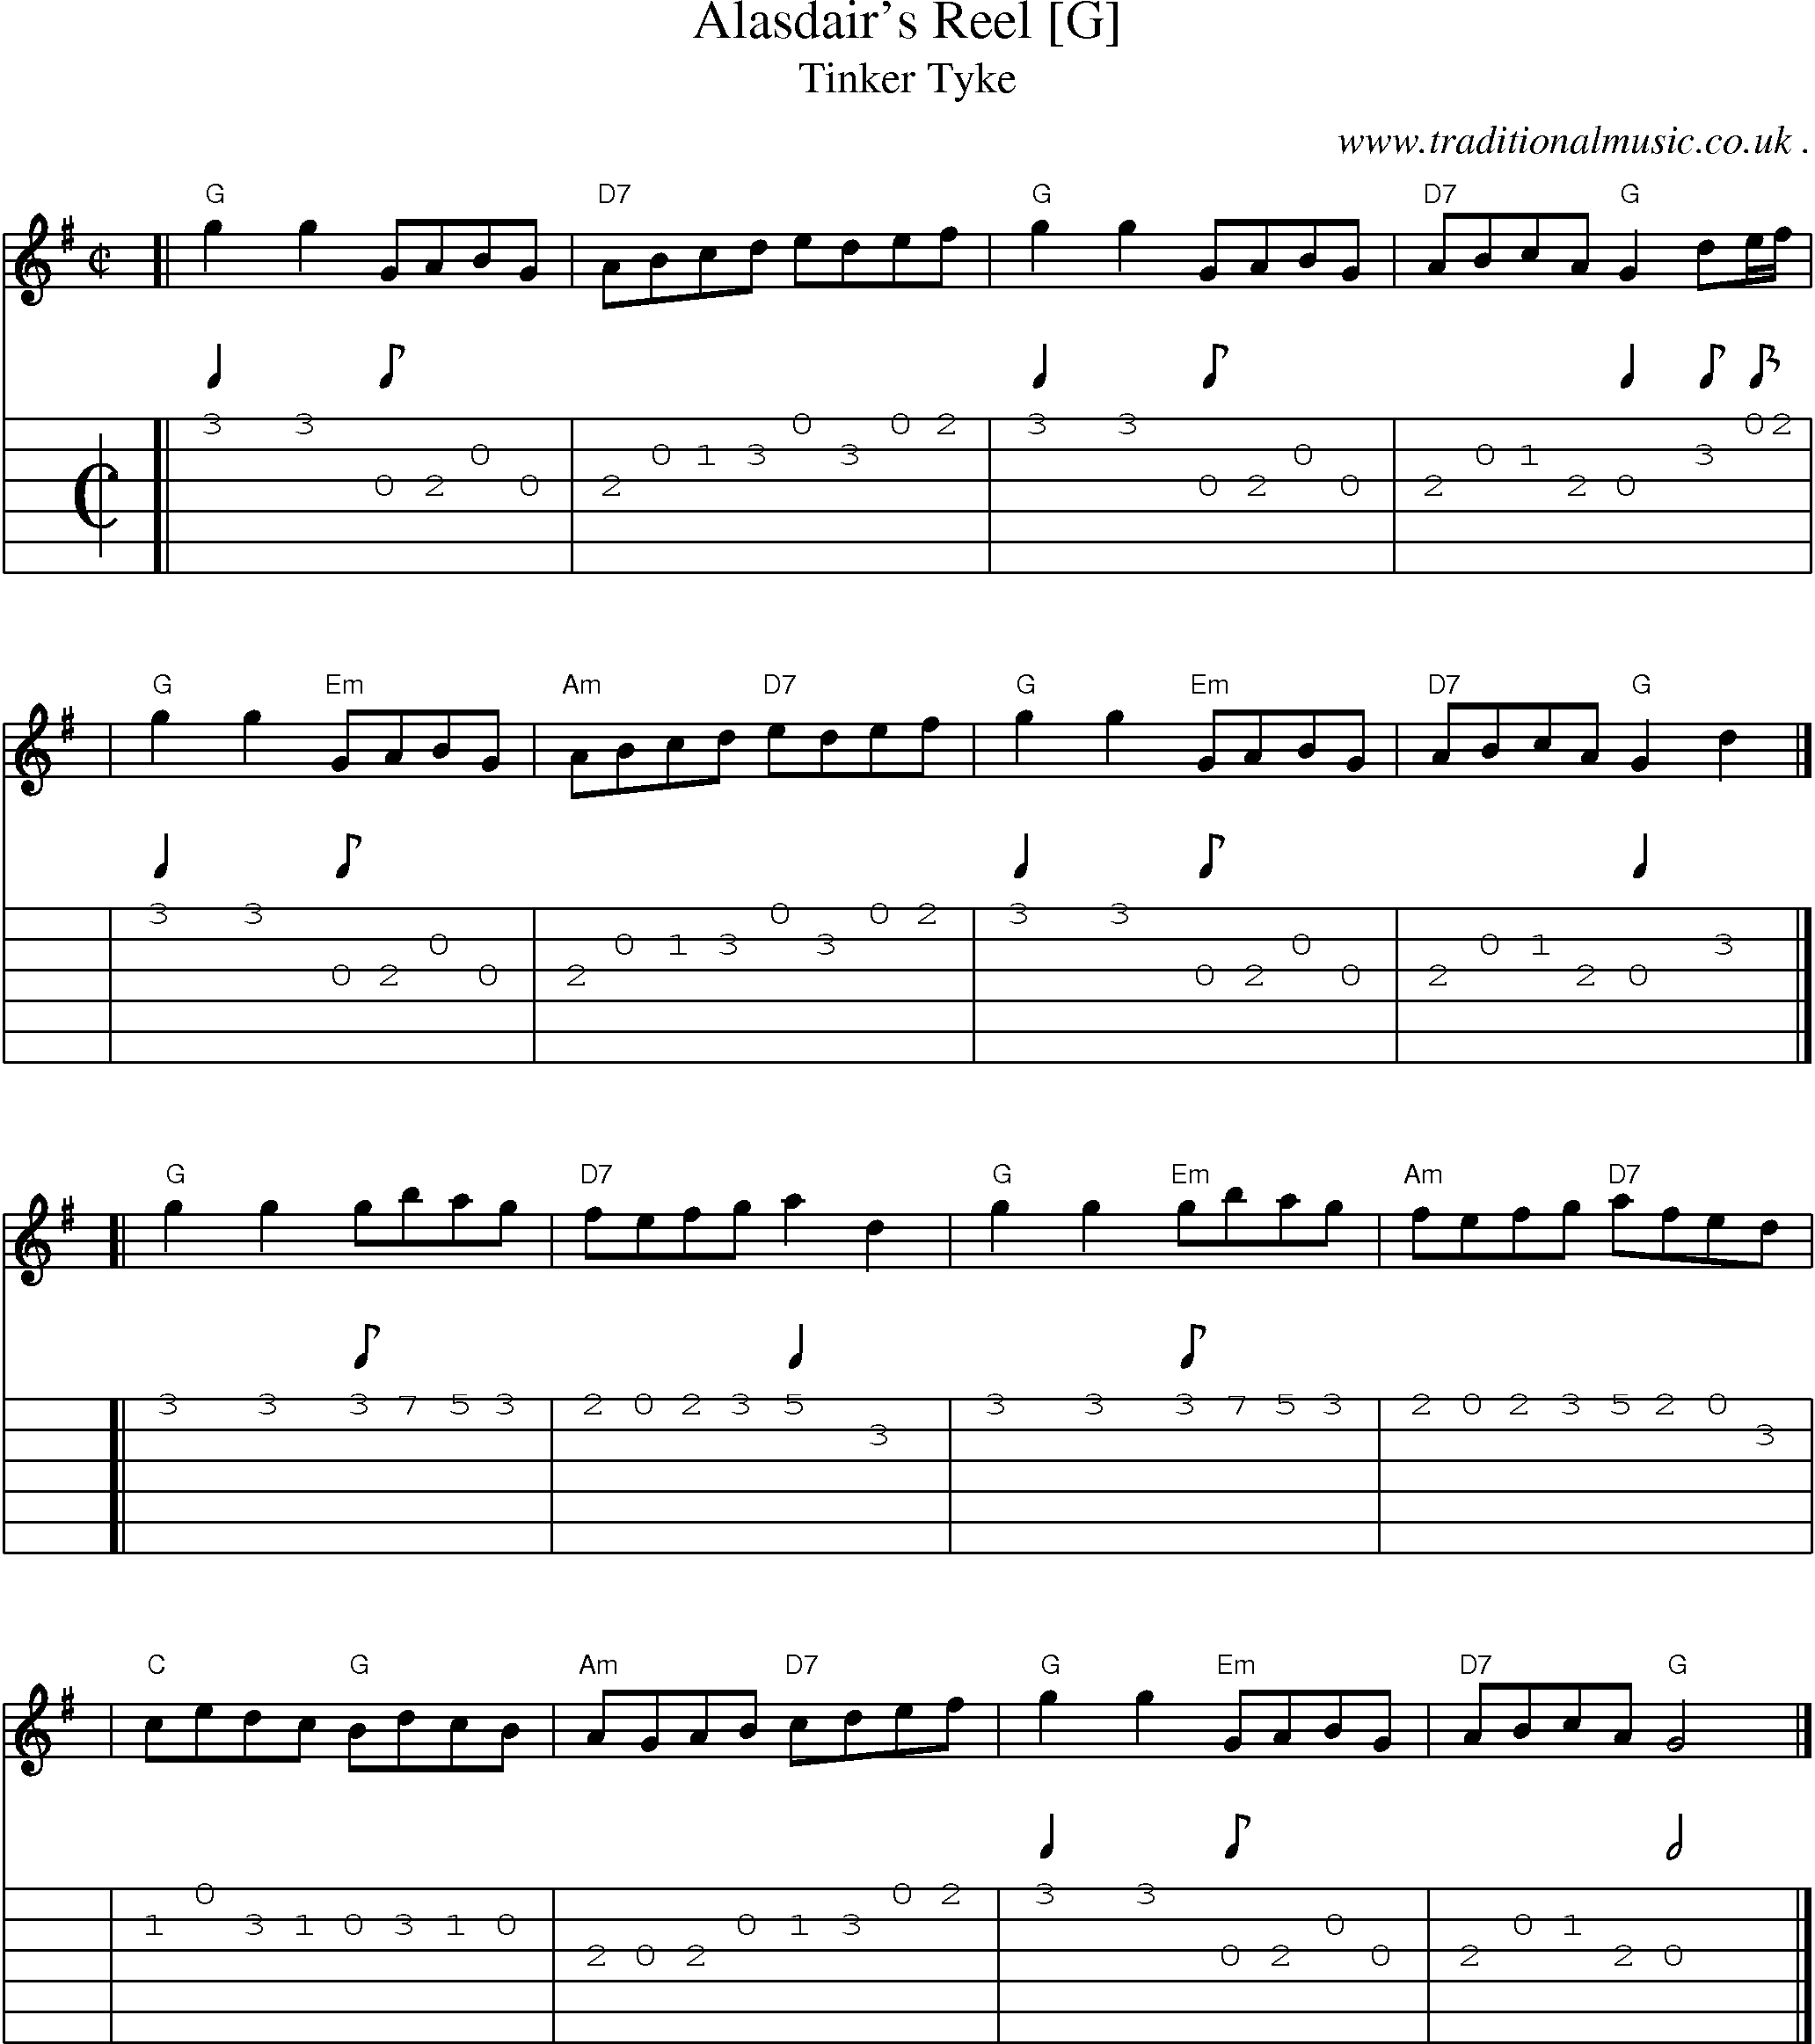 Sheet-music  score, Chords and Guitar Tabs for Alasdairs Reel [g]